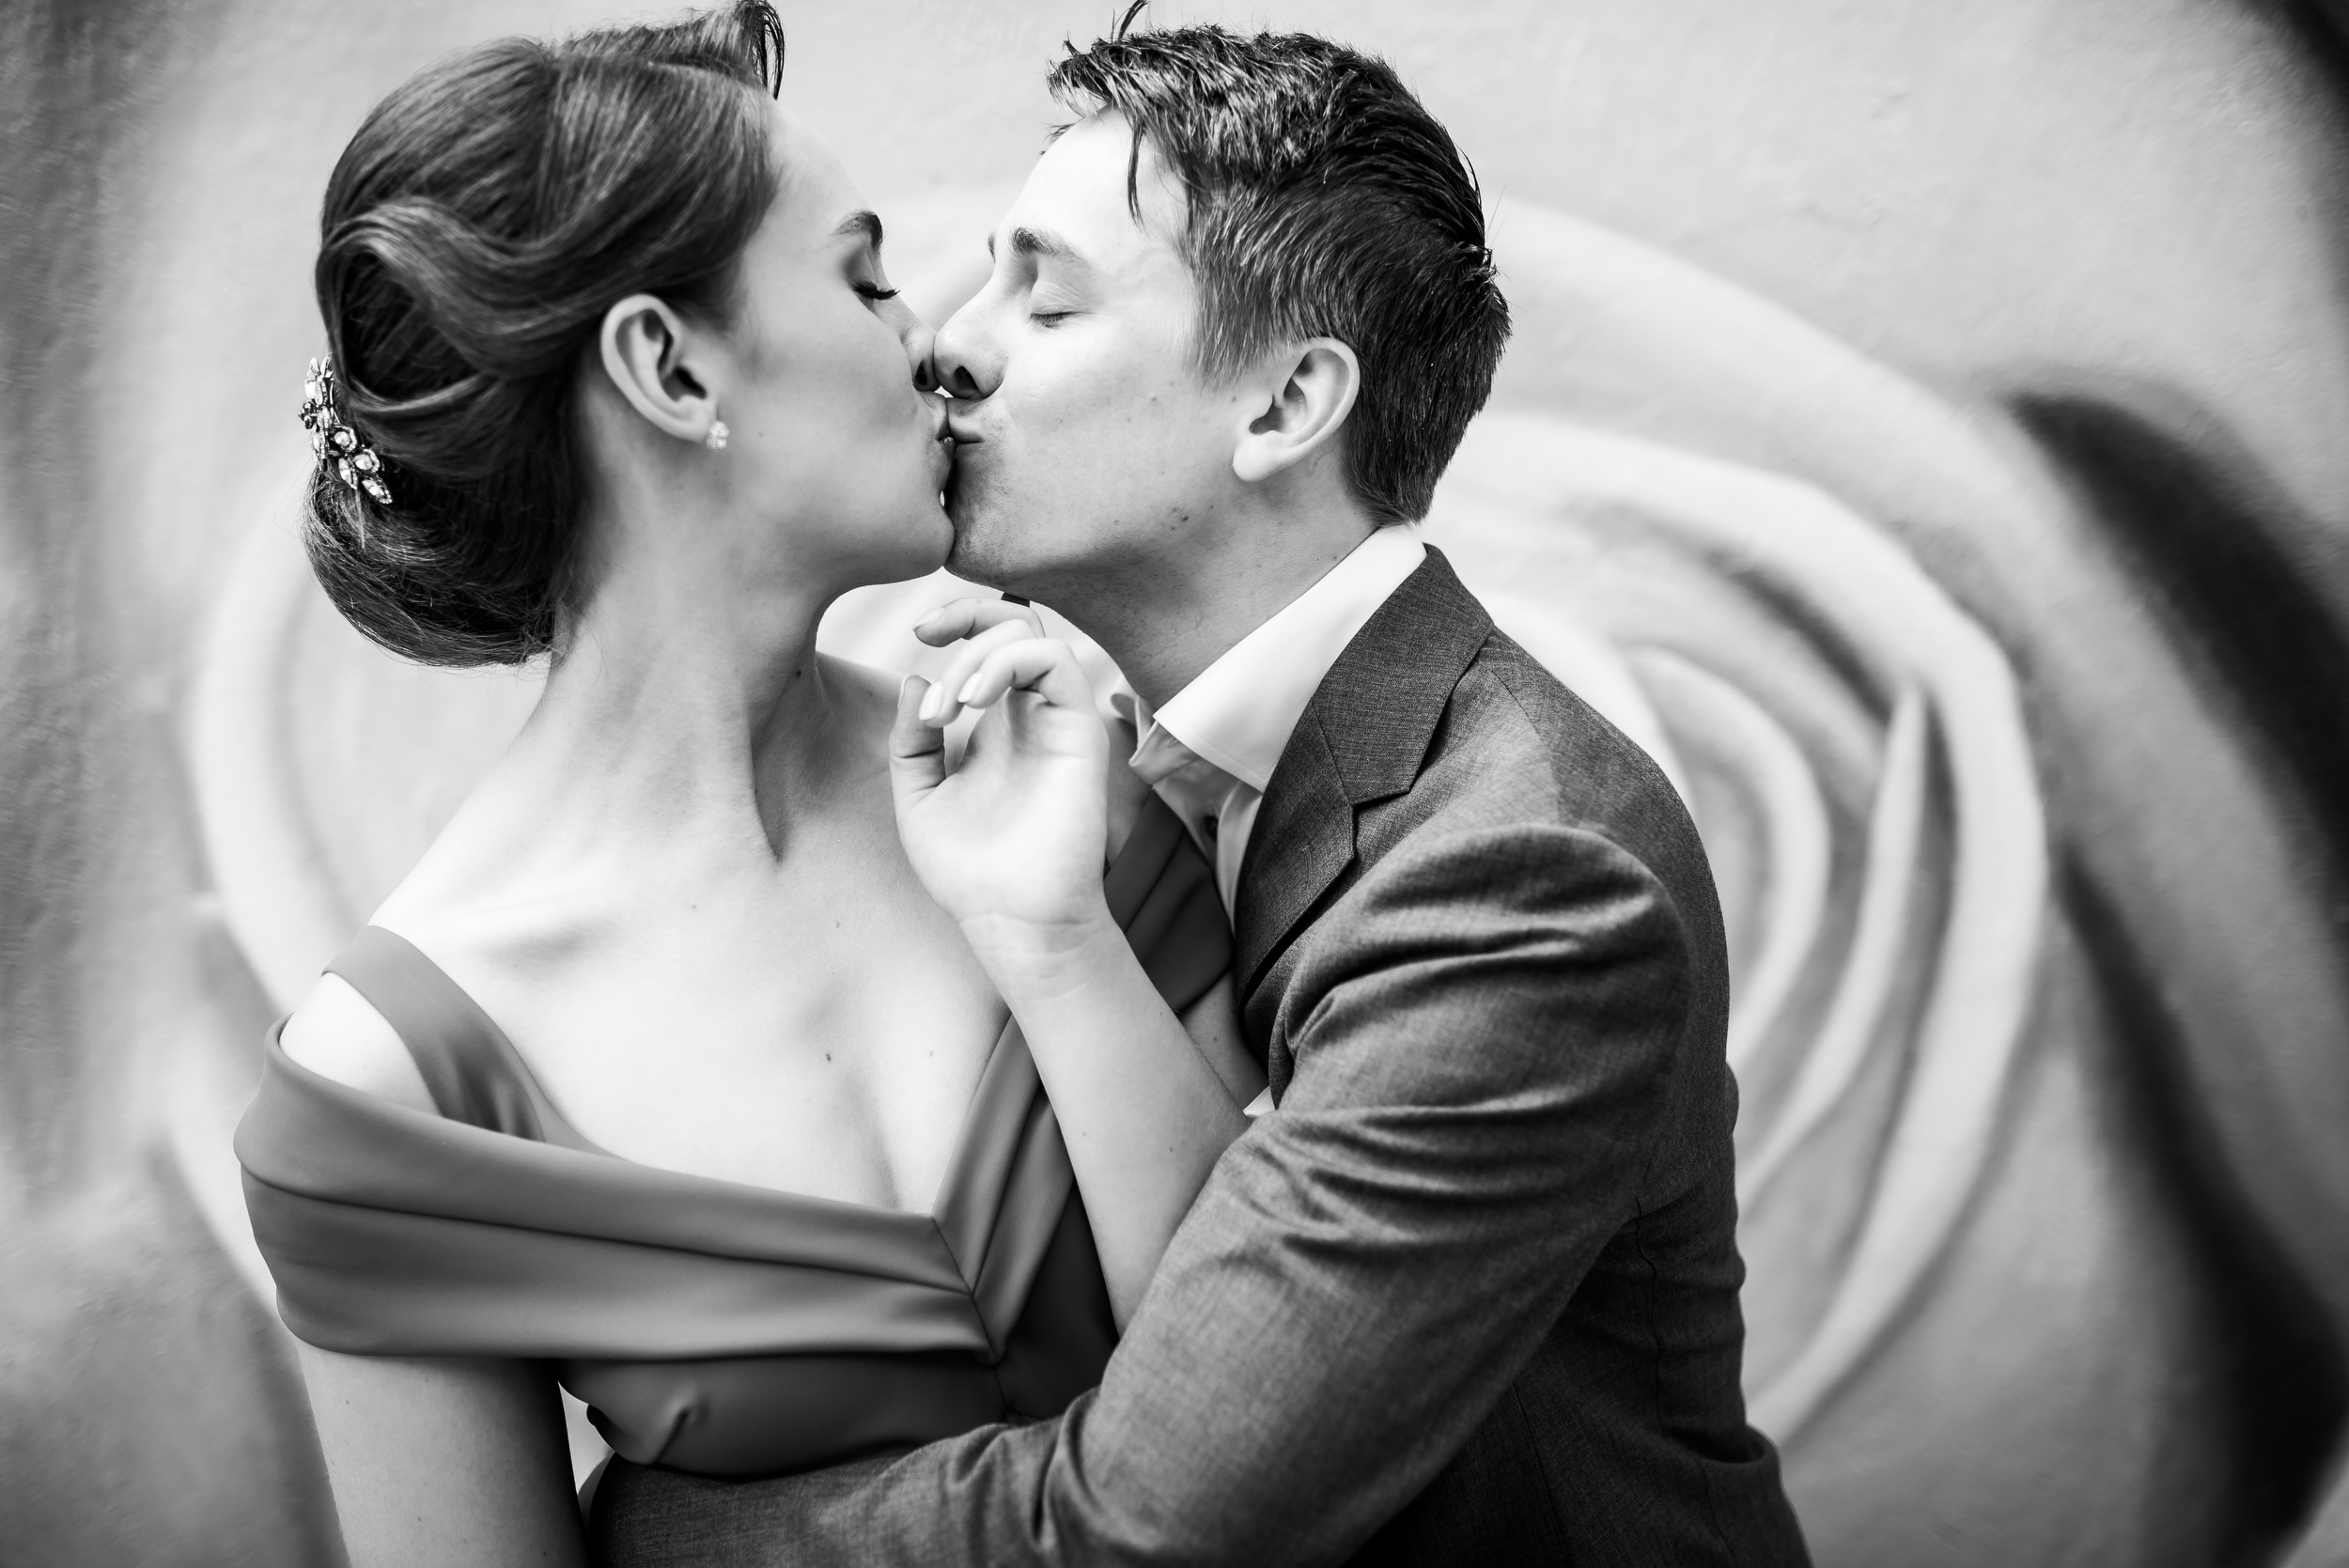 Carnivale Chicago wedding captured by J Brown Photography